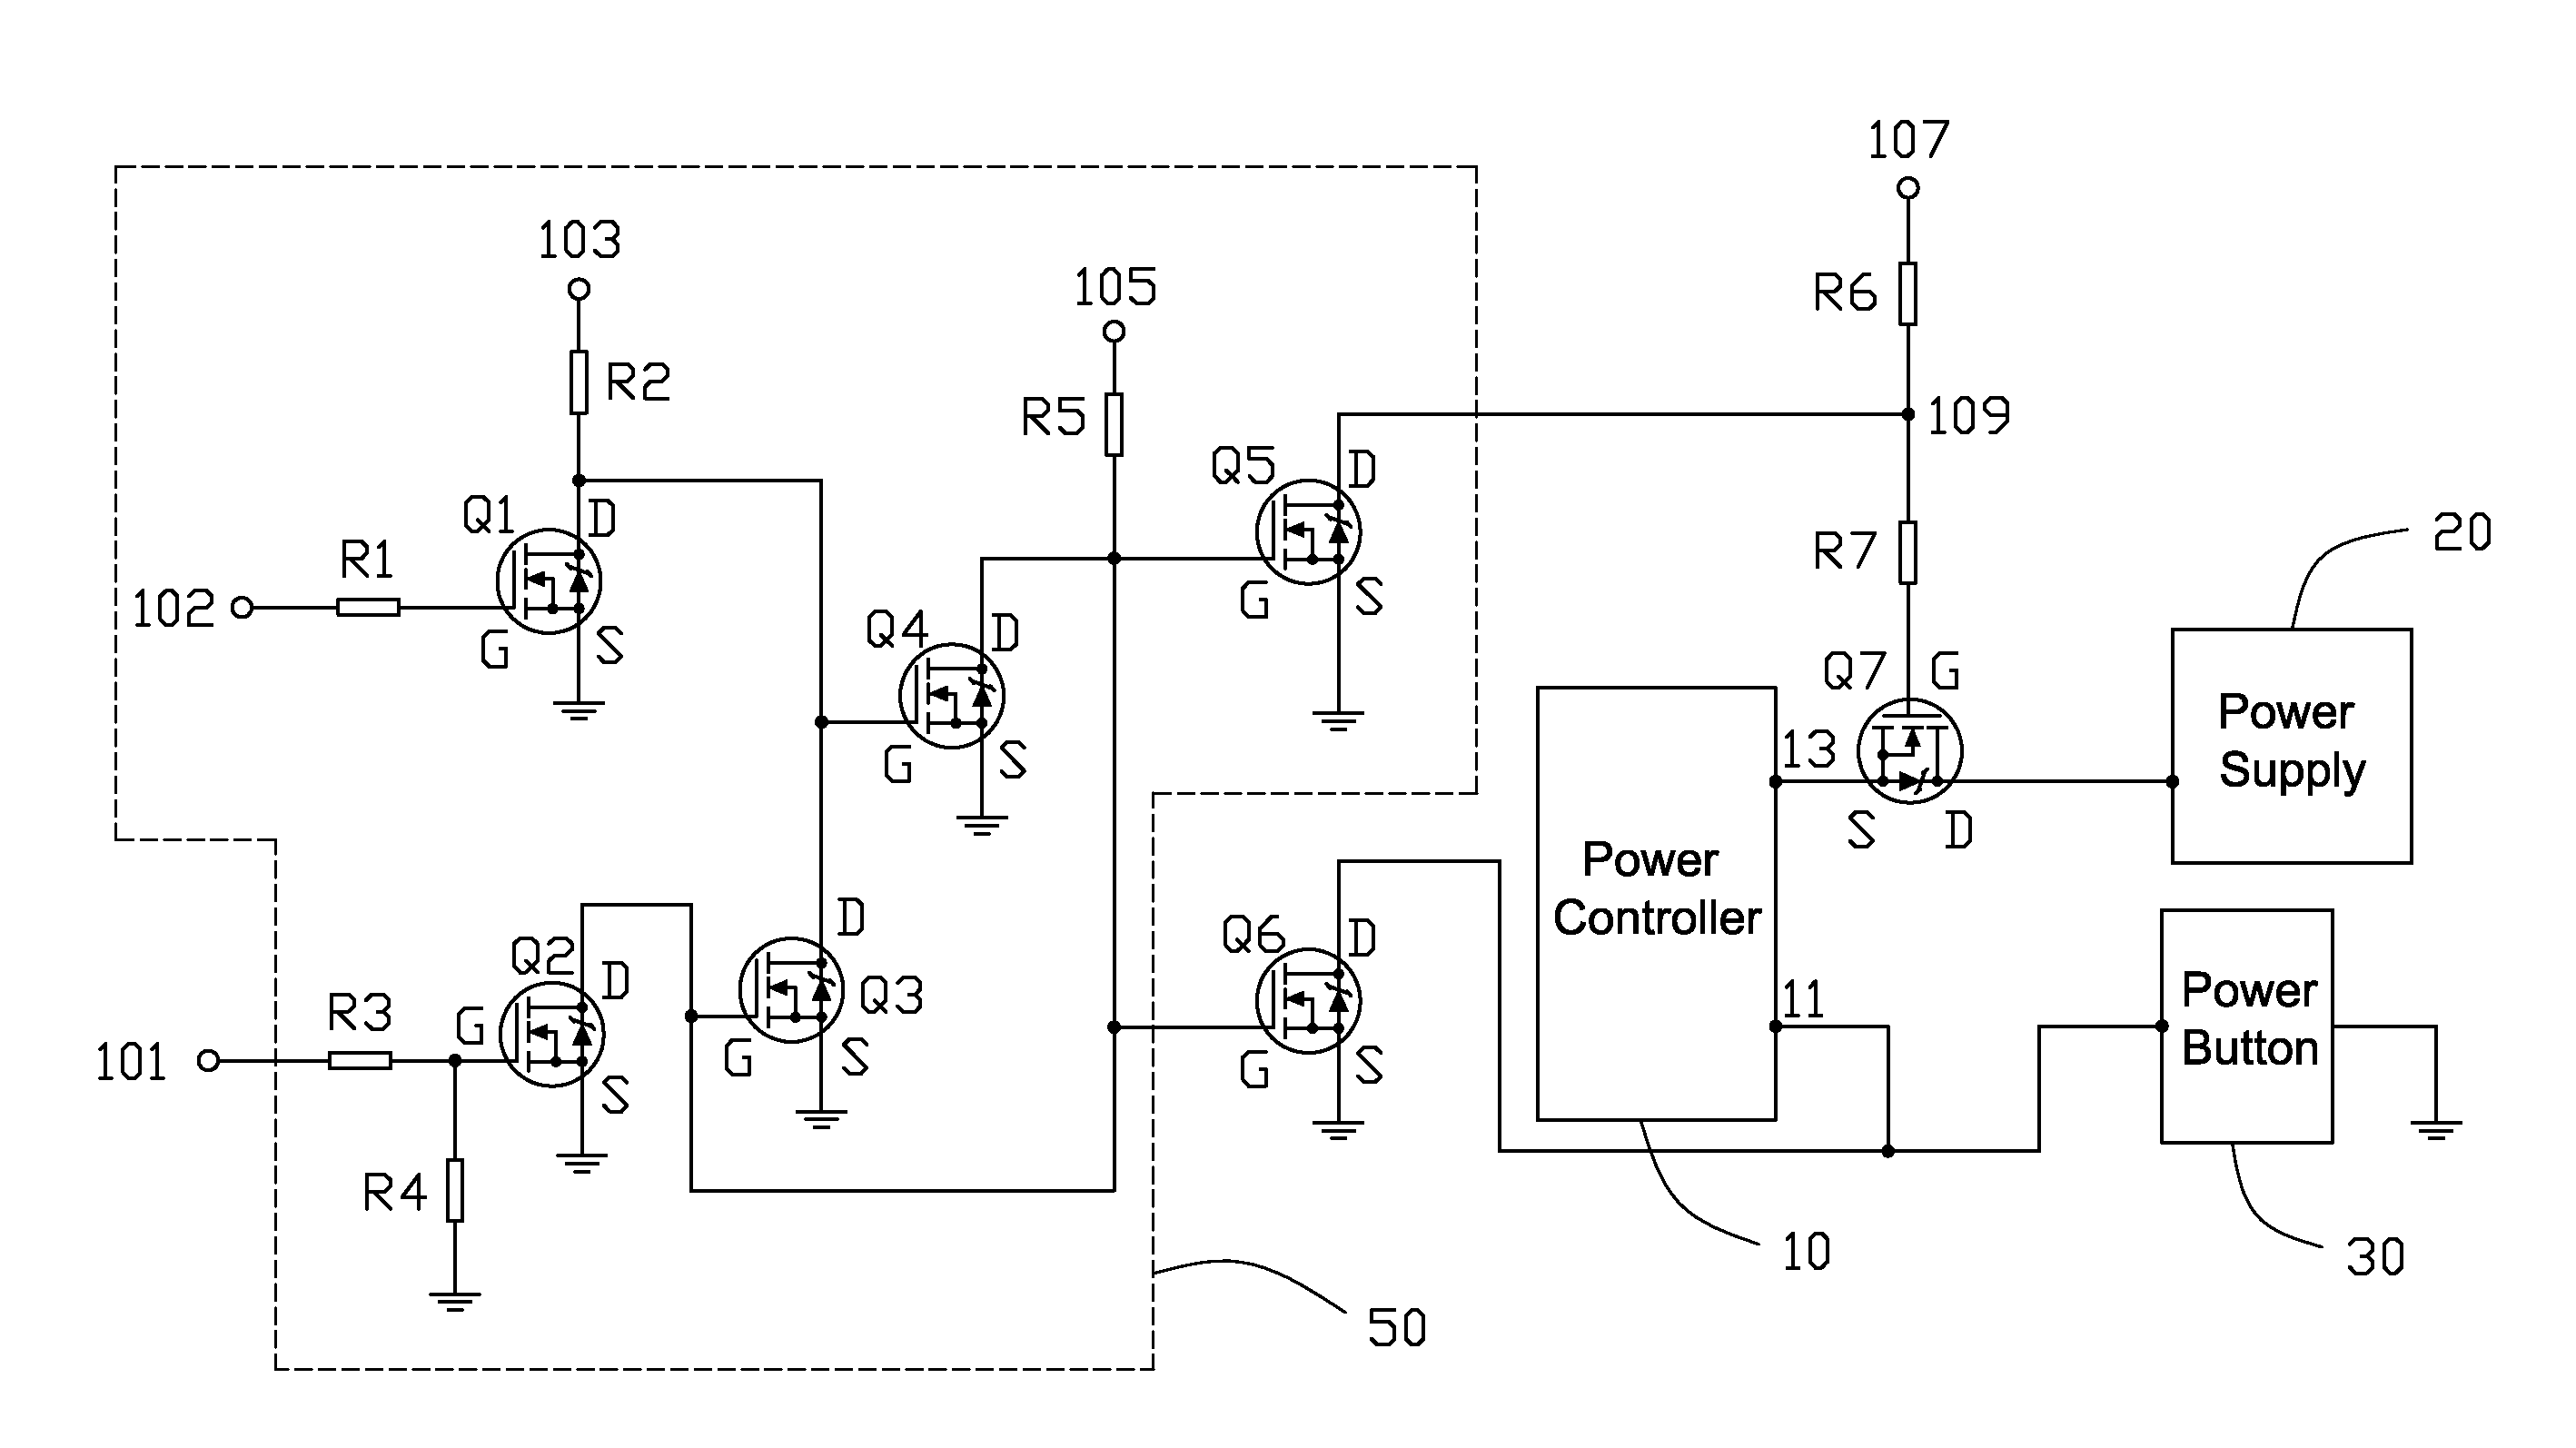 Circuit for protecting computer